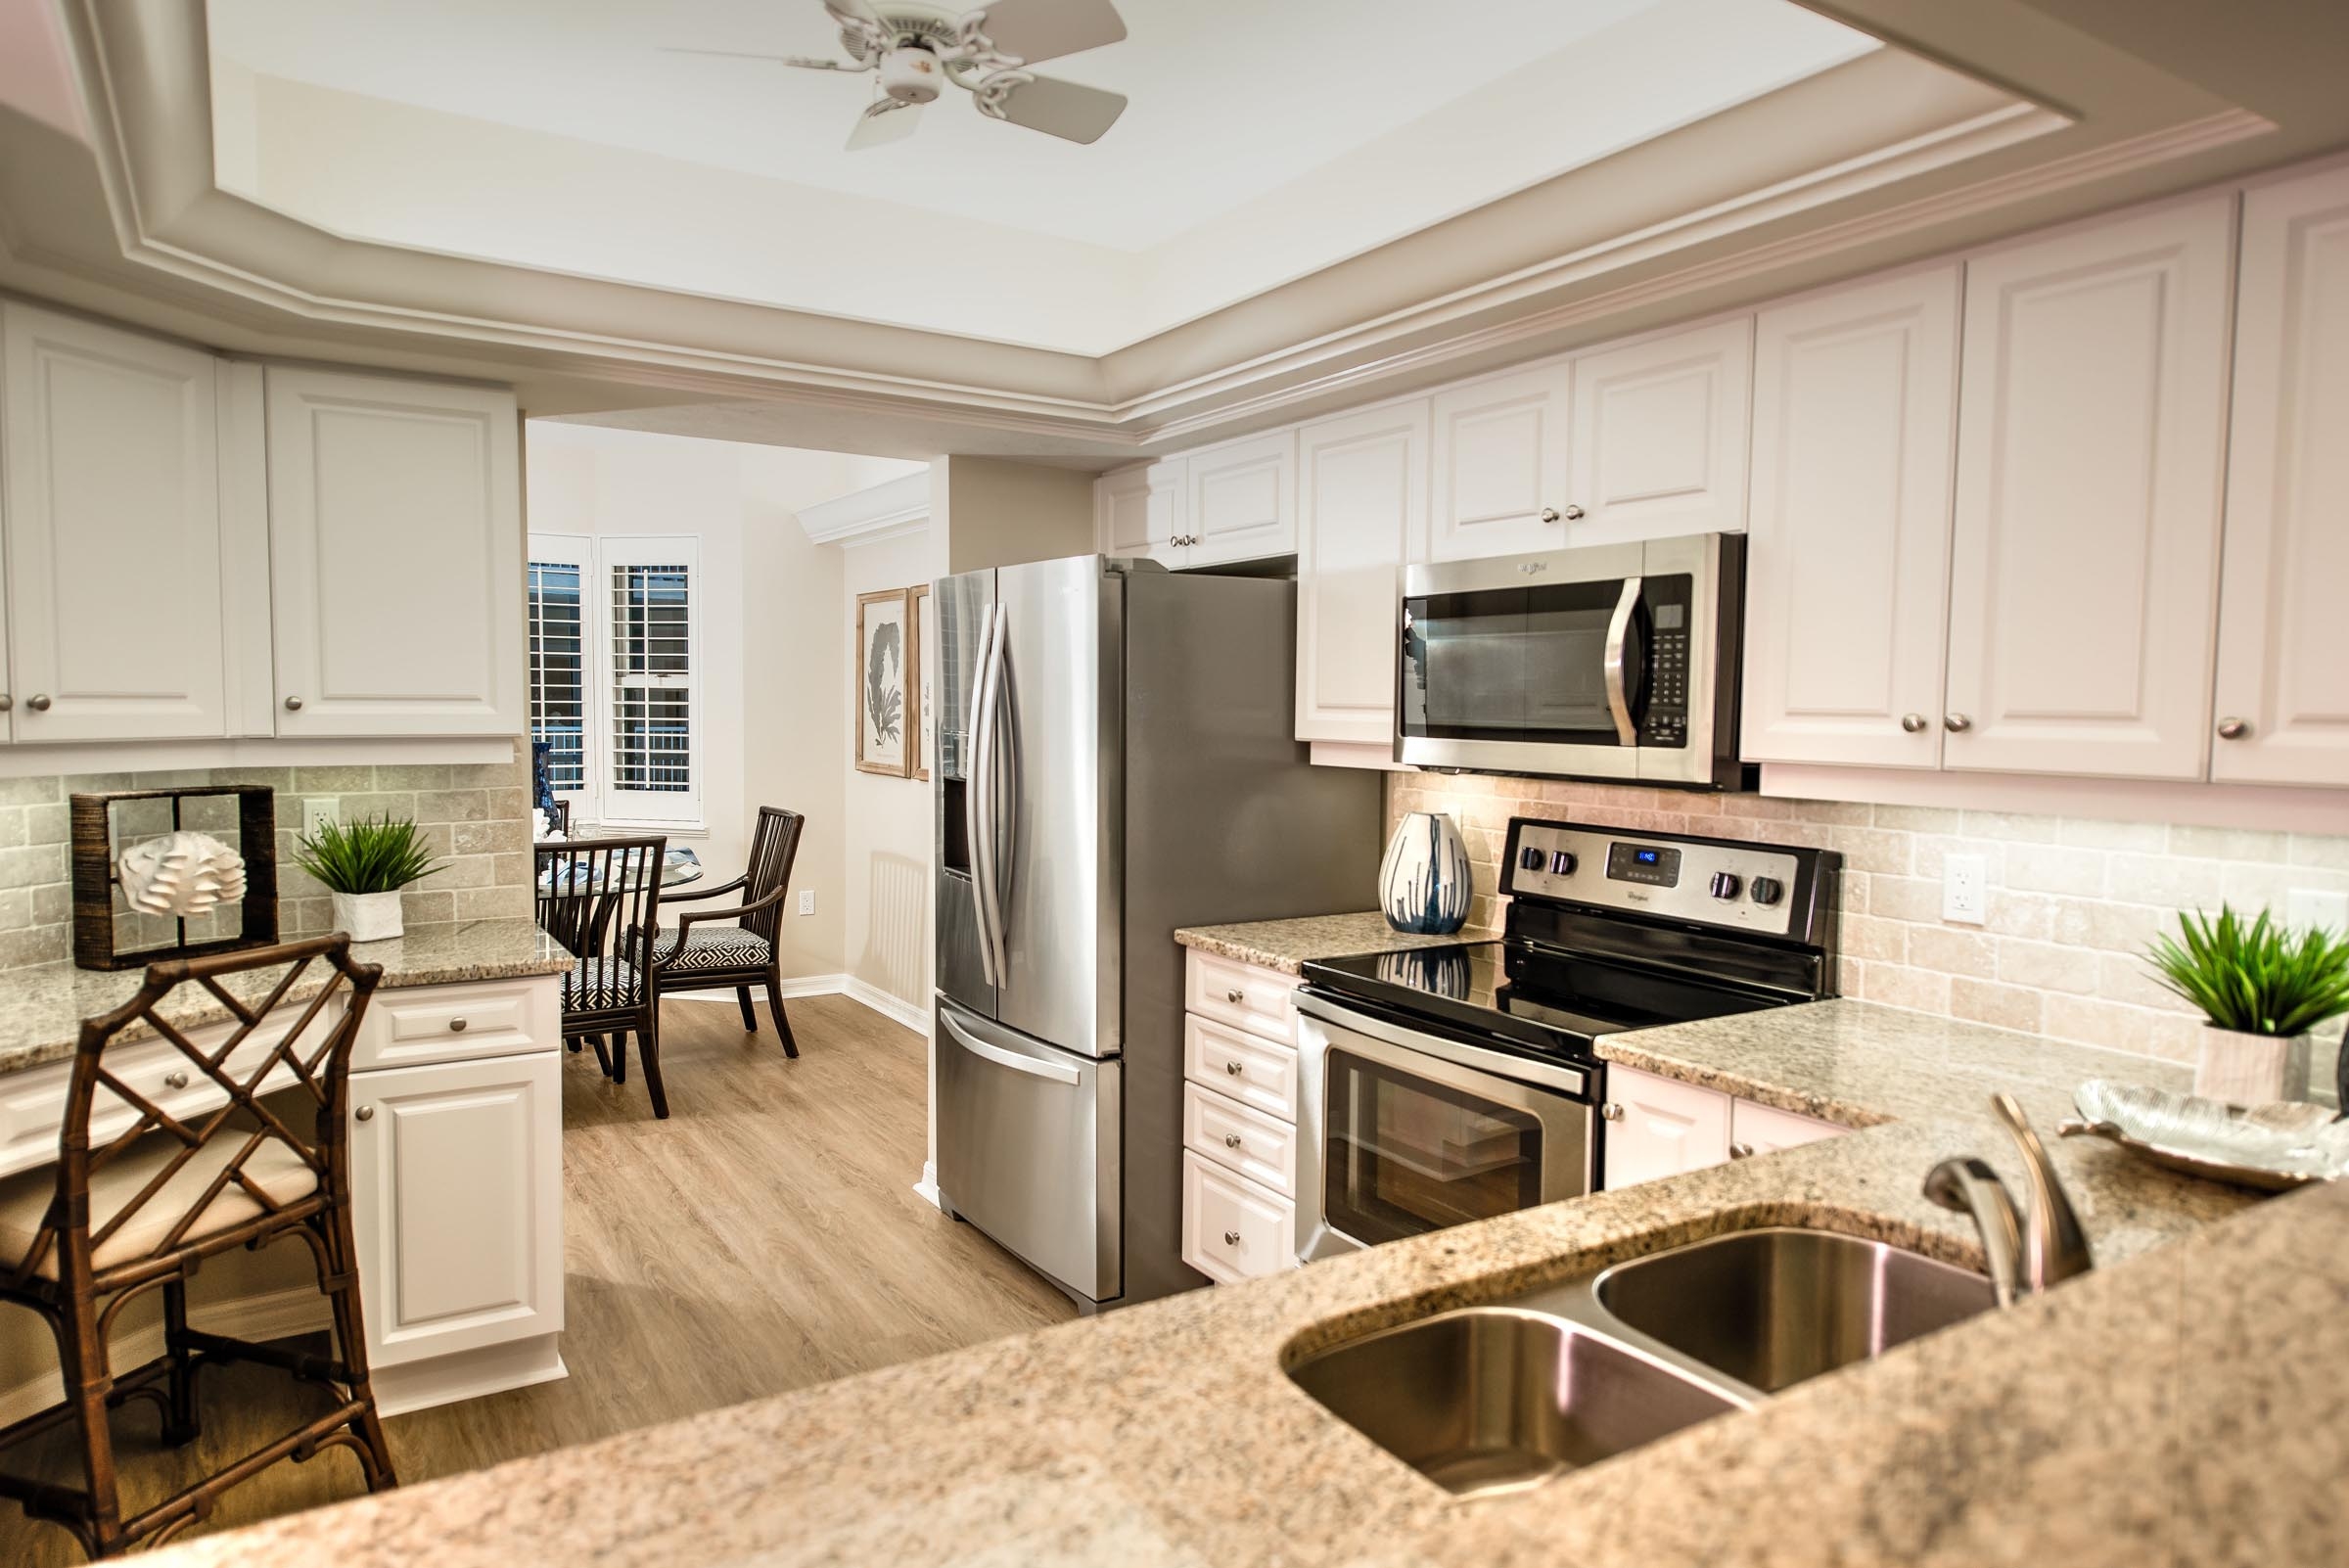 The kitchen at Lakewood Model Home at Shell Point Retirement Community